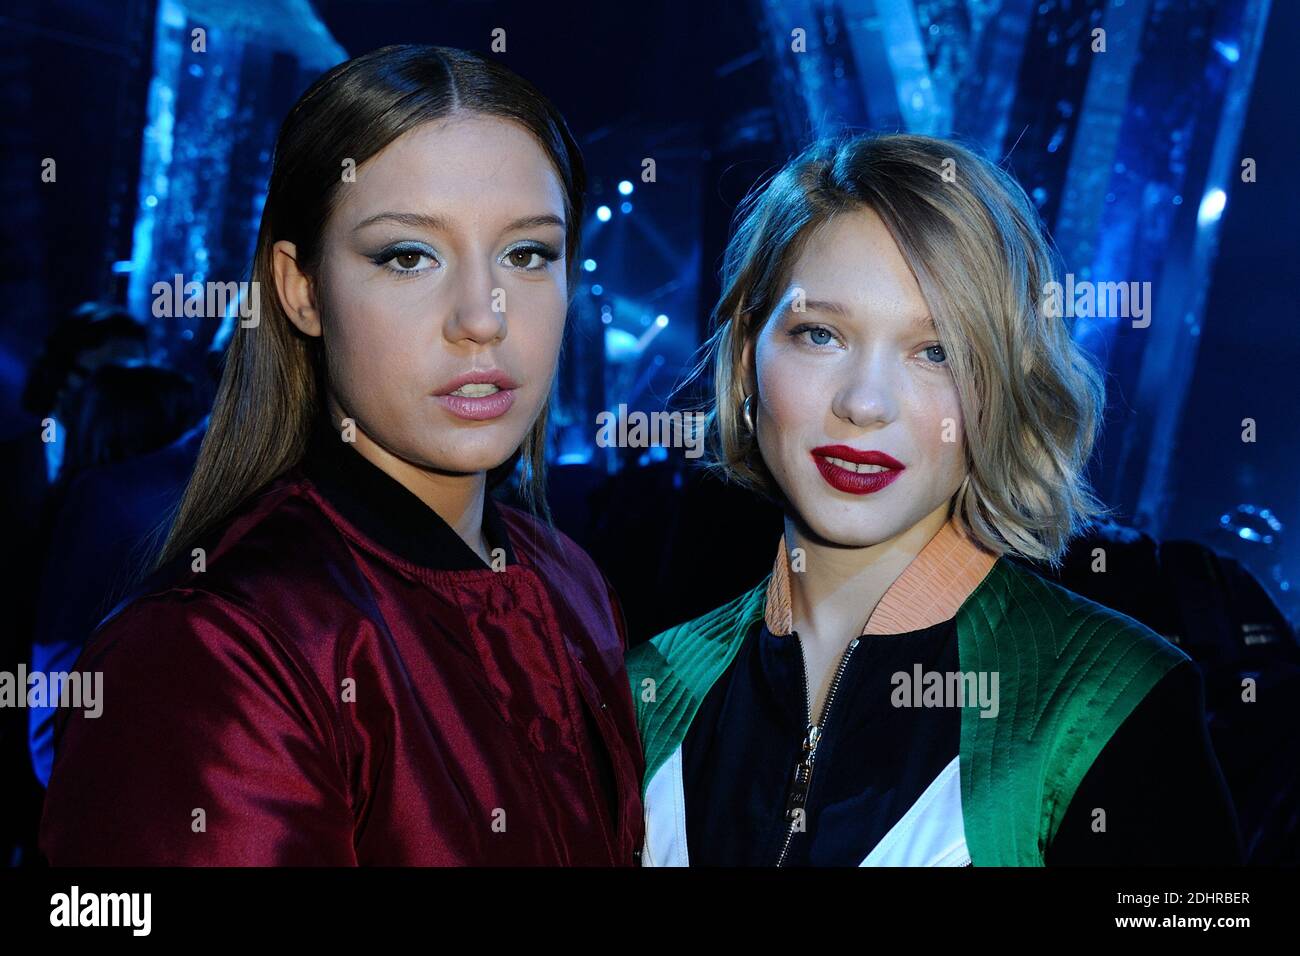 Adele Exarchopoulos (pregnant) and Camille Seydoux attending the photocall  held before the Louis Vuitton show during Paris Fashion Week Ready to wear  FallWinter 2017-18 on March 07, 2017 at the Louvre museum